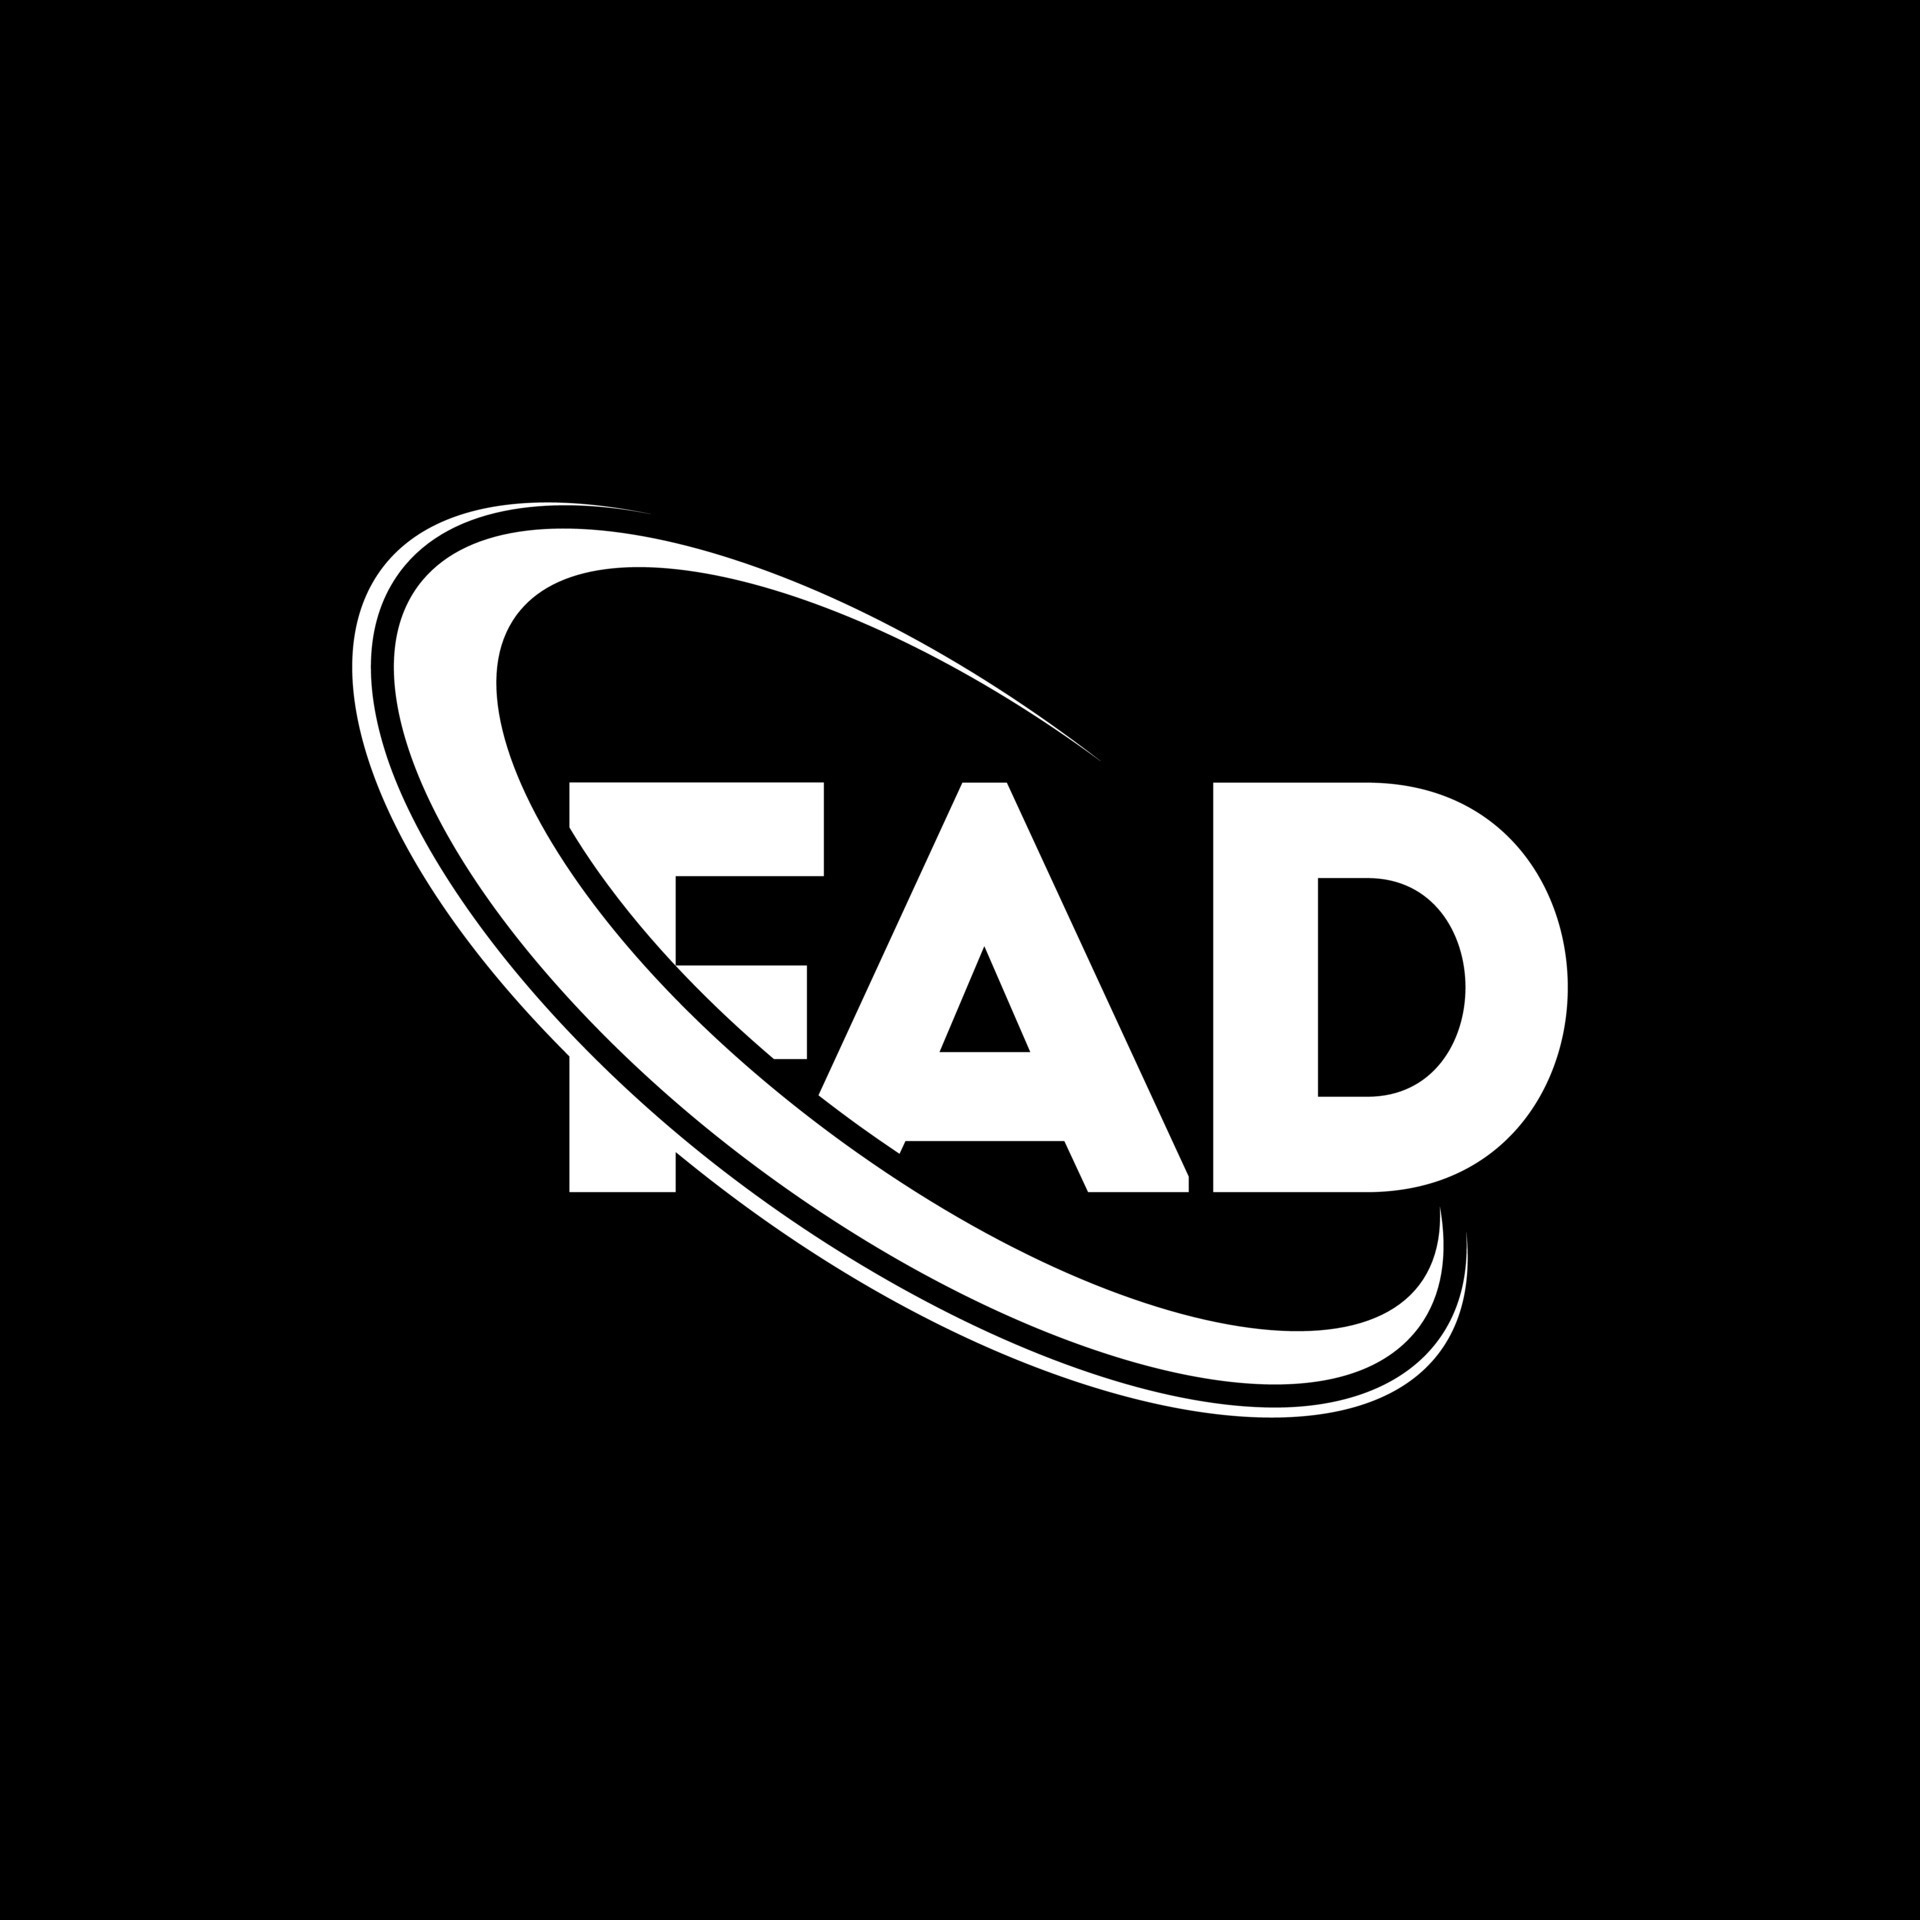 FAD autumn/winter 2017 collection catwalk show | LFW – The Upcoming